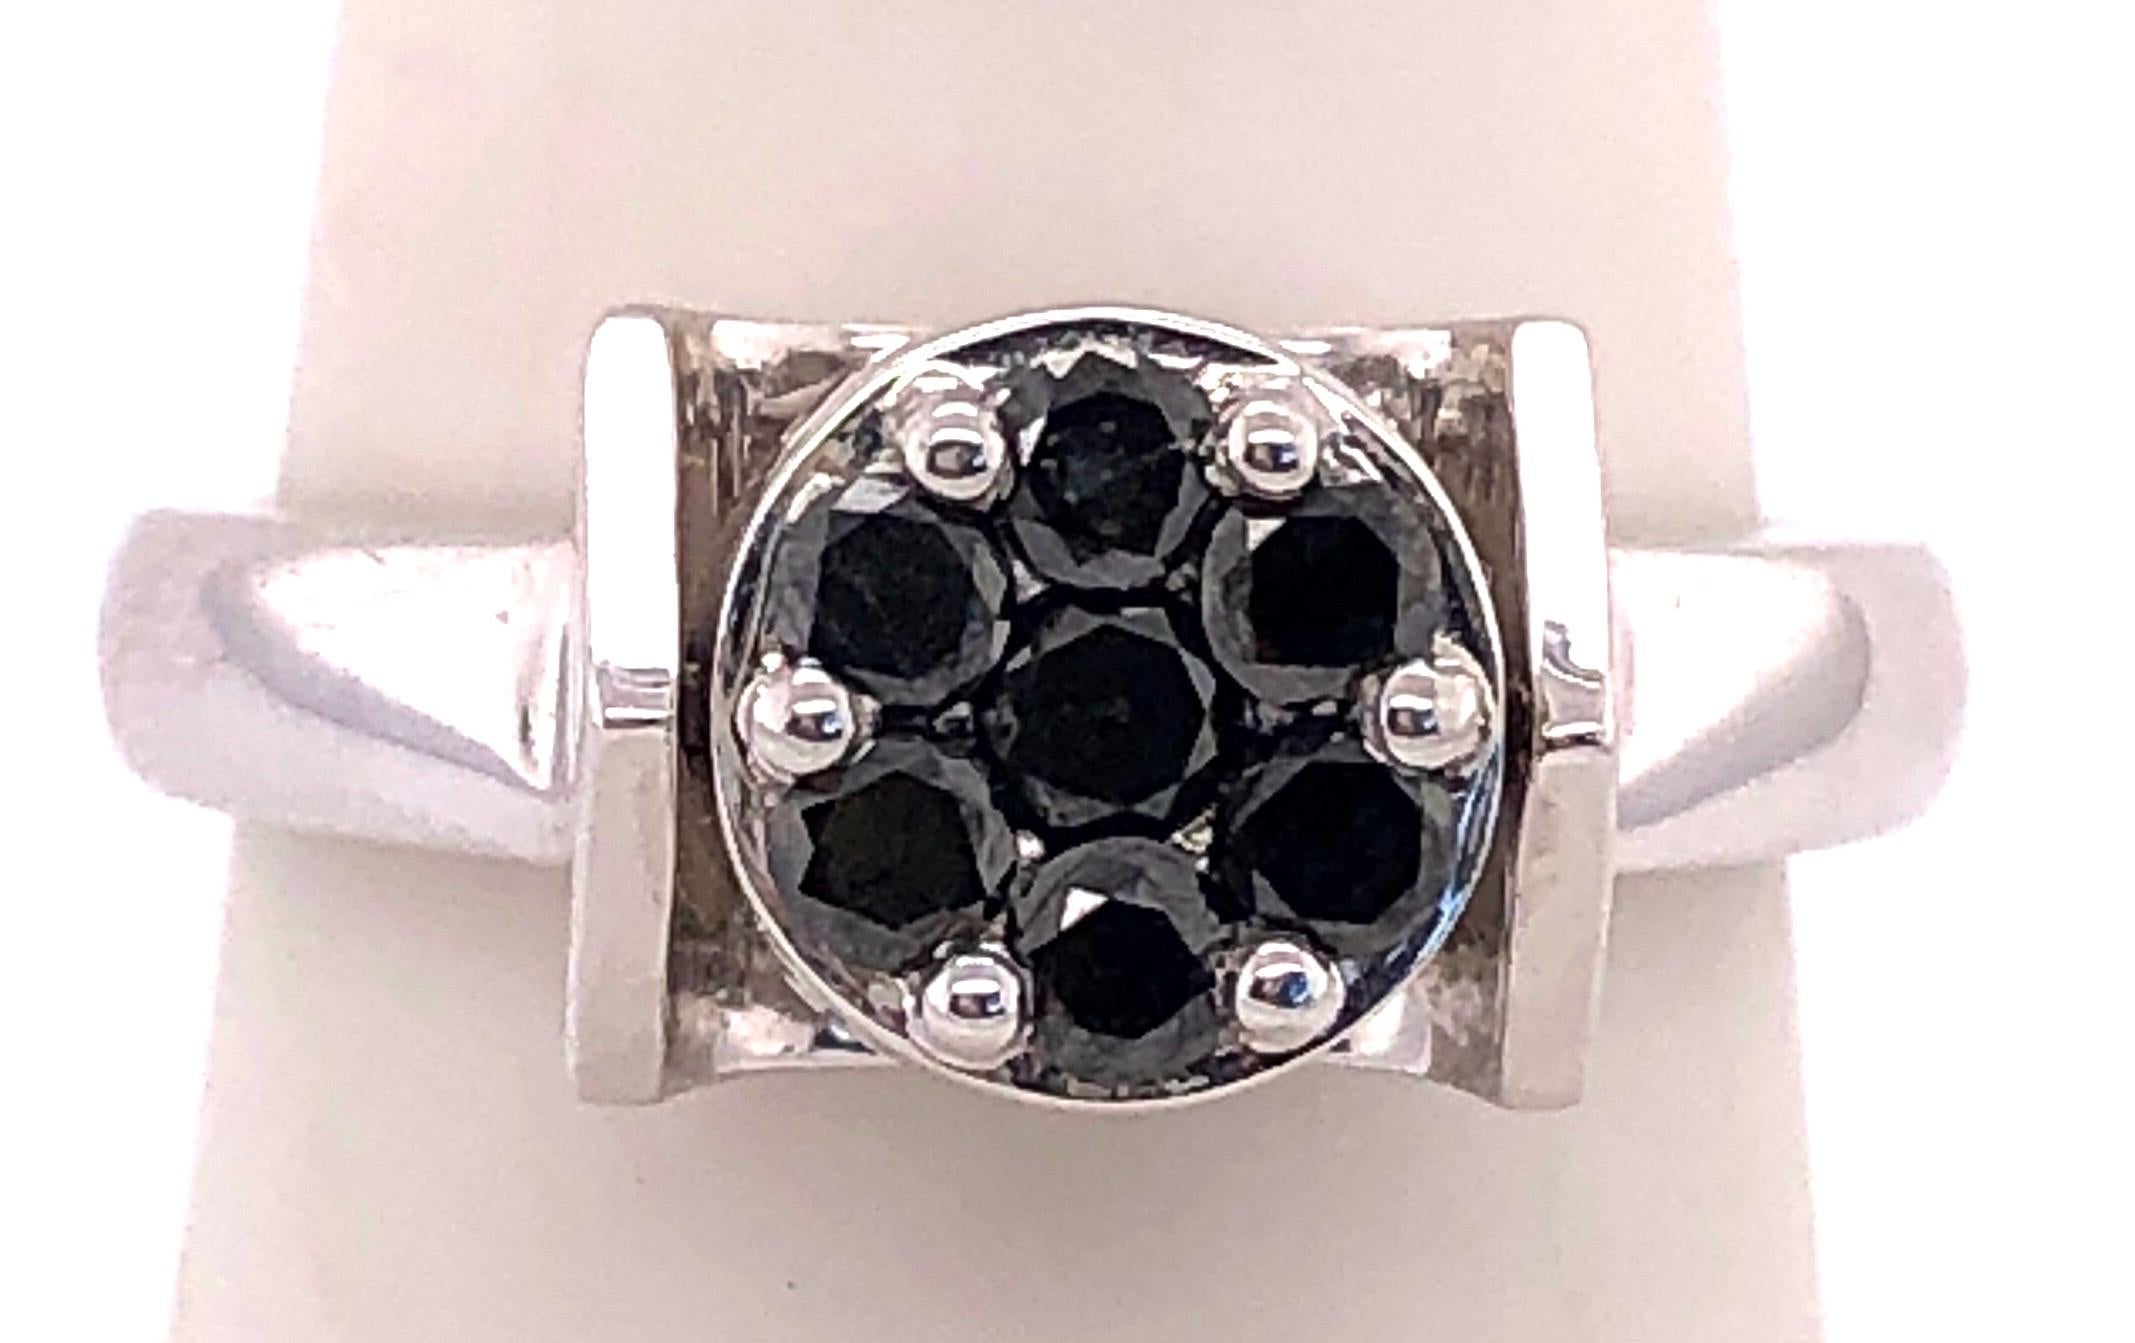 14 Kt White Gold Reversible Ring with Both Diamonds and Black Sapphires.
Size 7 
6.37 grams total weight.